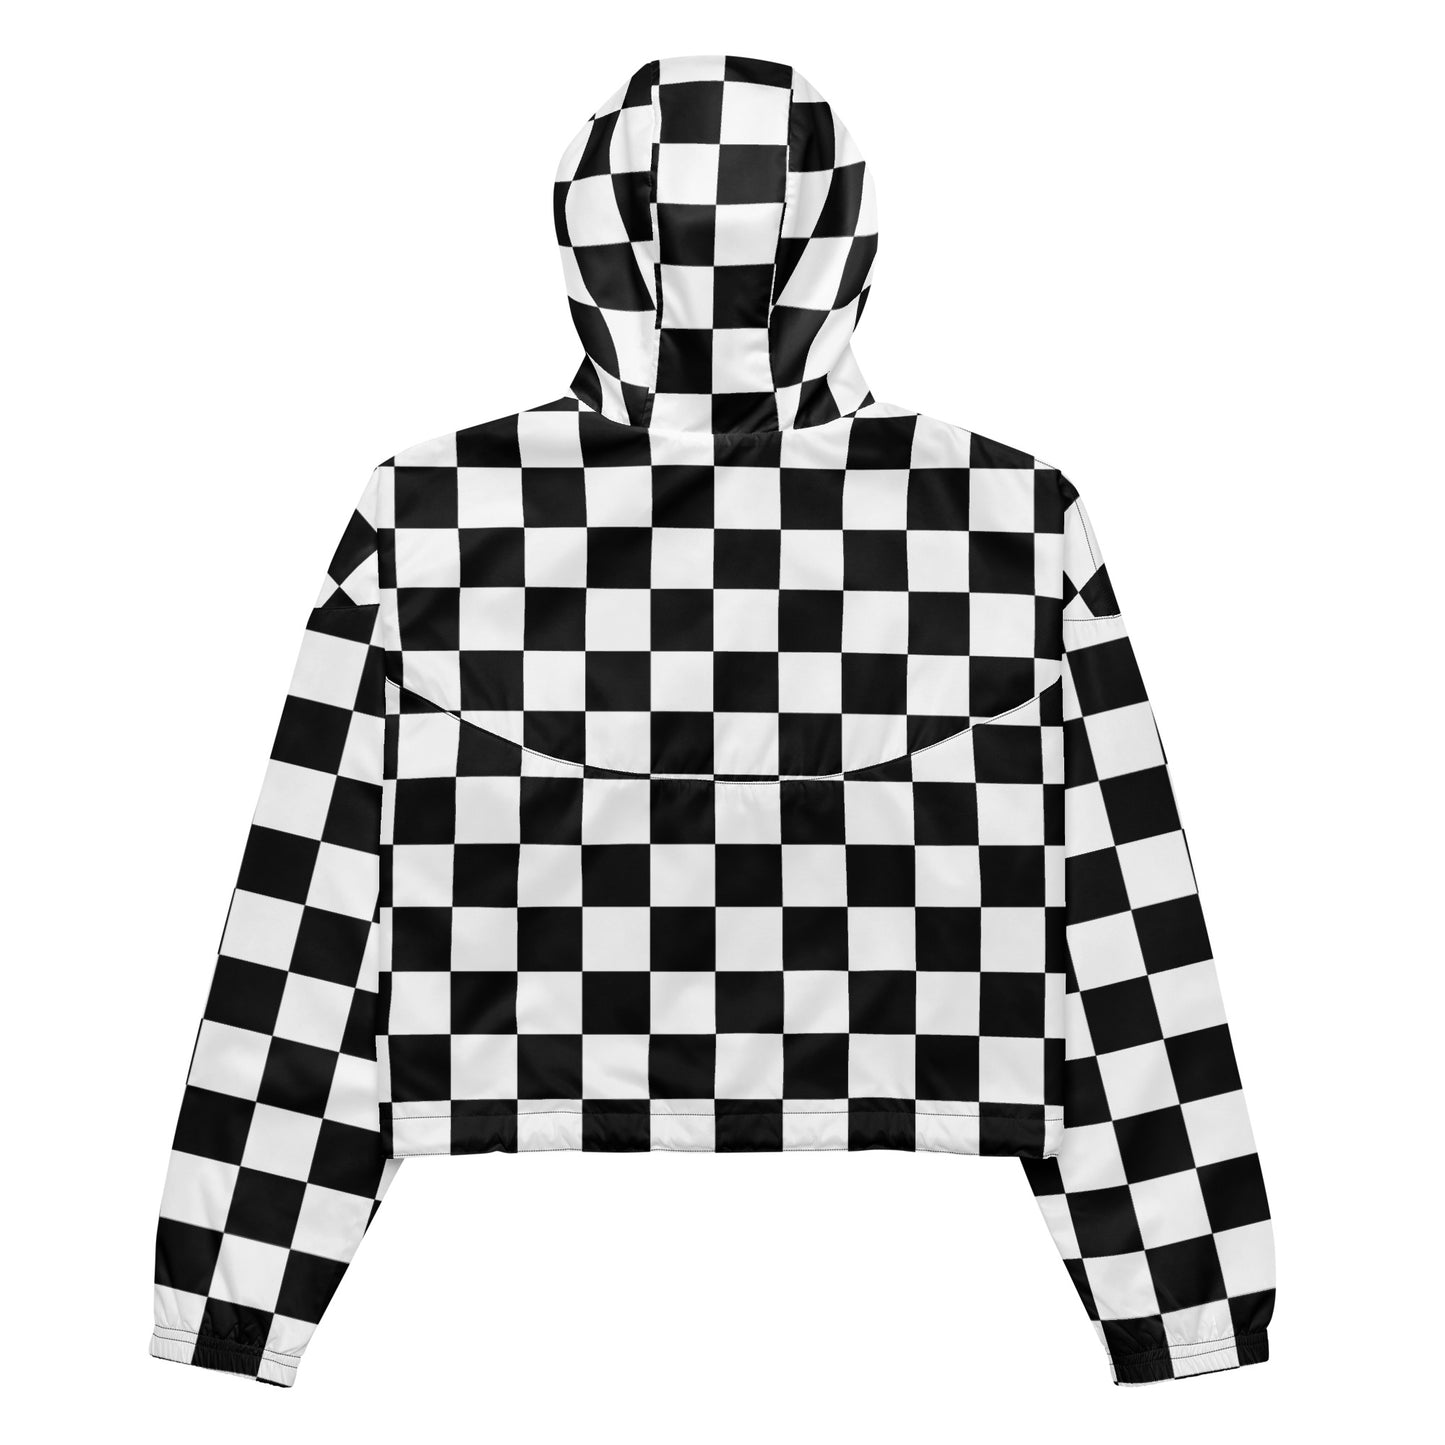 Checkmate - Inspired By Harry Styles - Sustainably Made Women’s cropped windbreaker